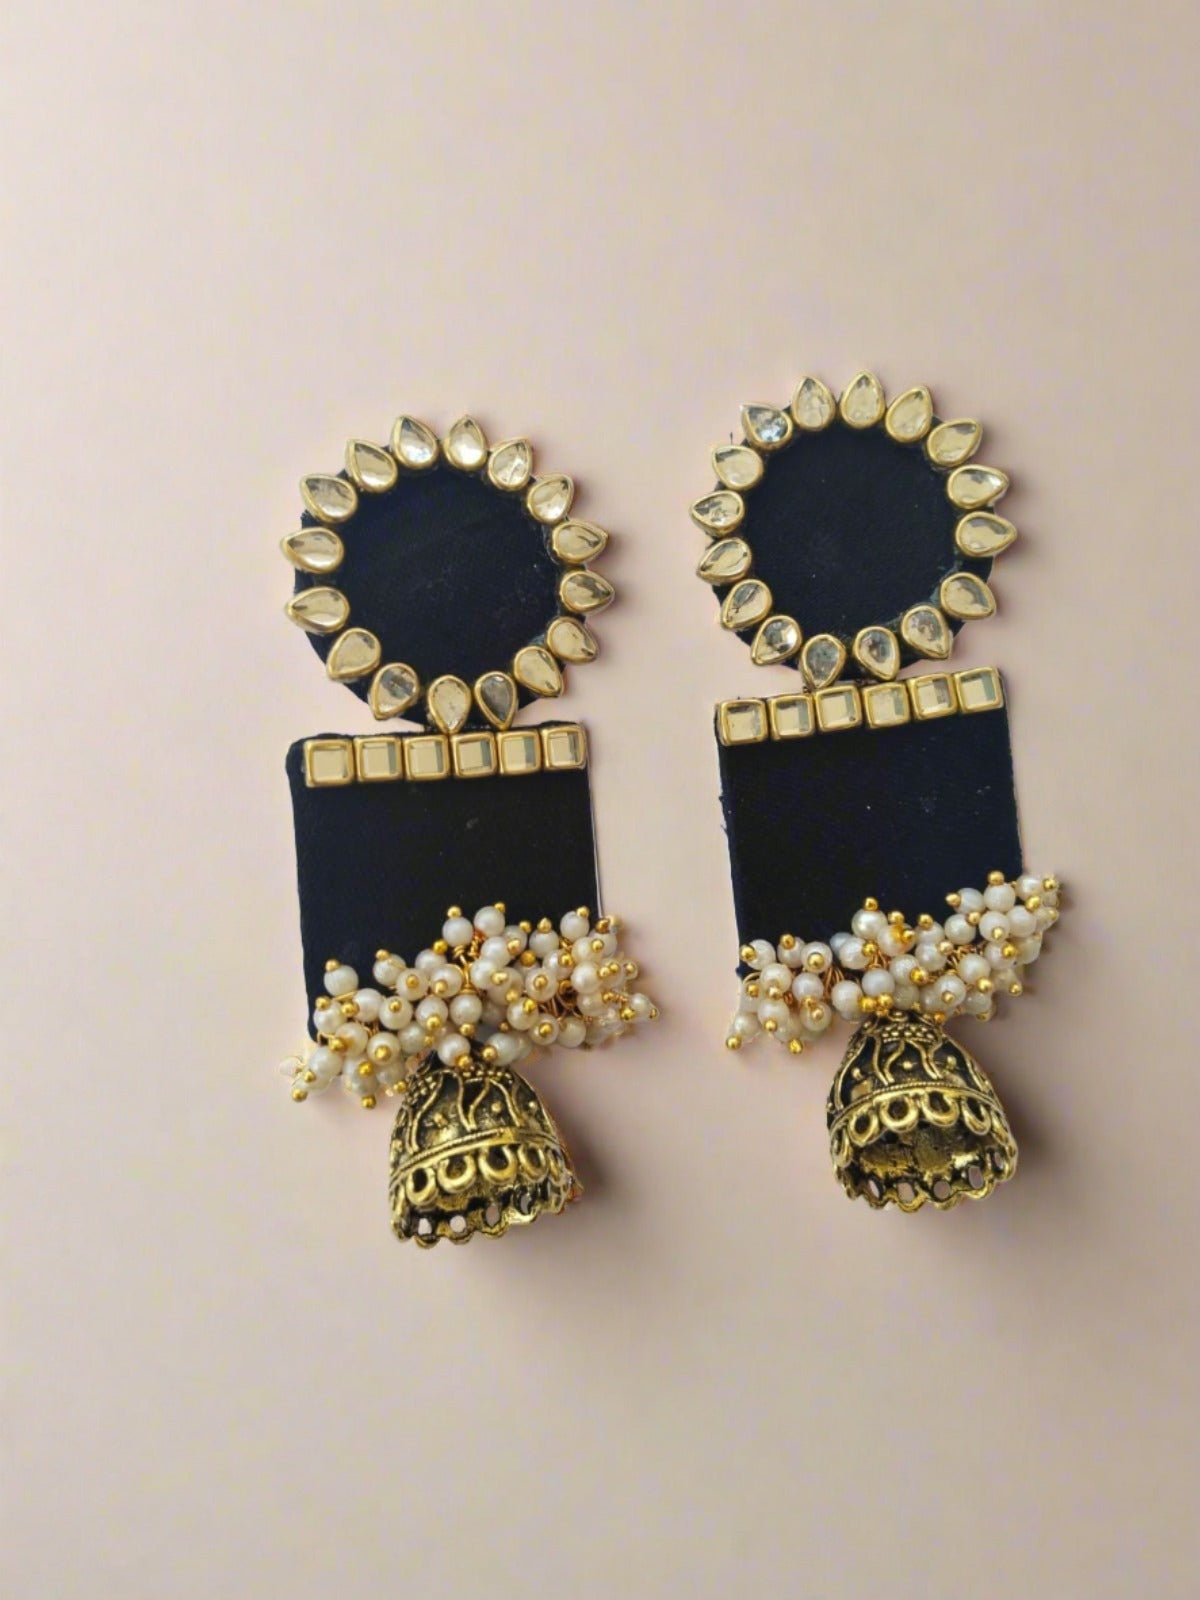 Black rectangular jhumka with white and golden beads on white grey backdrop